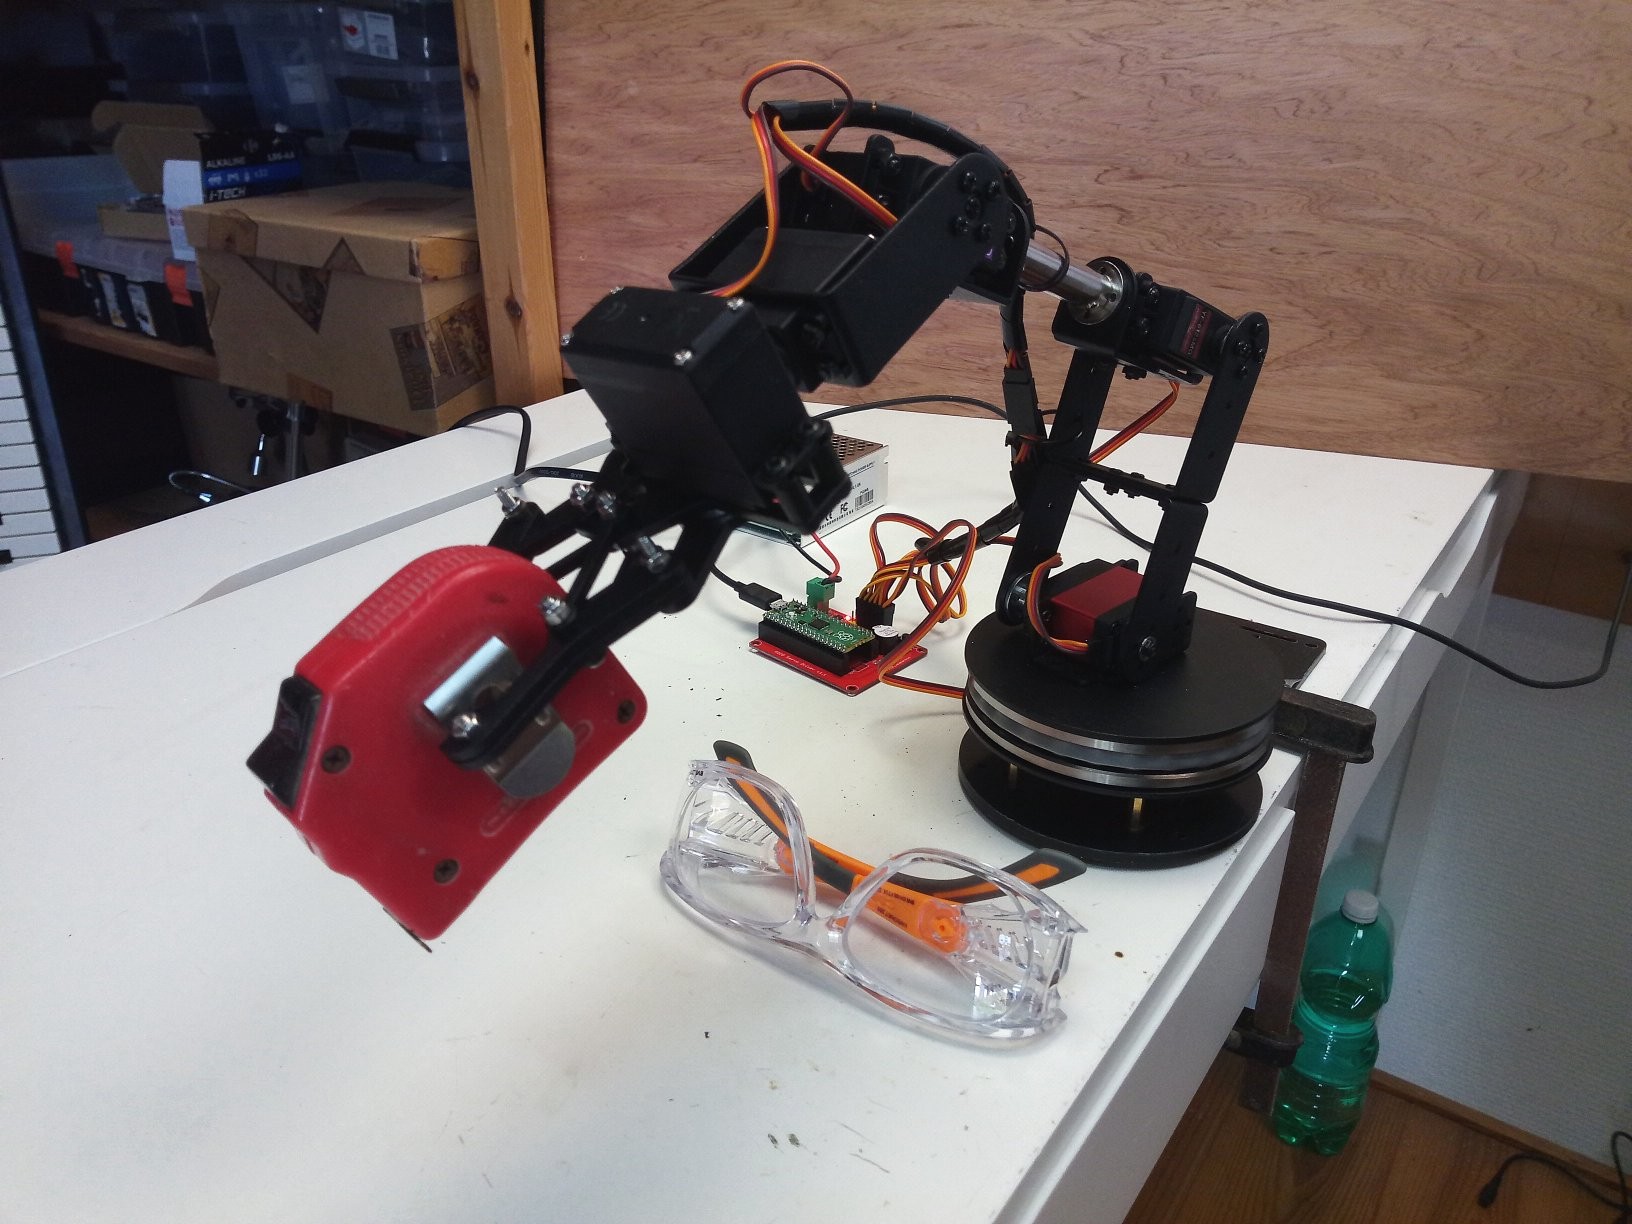 Not for the Faint-Hearted: Robot Arm Kit